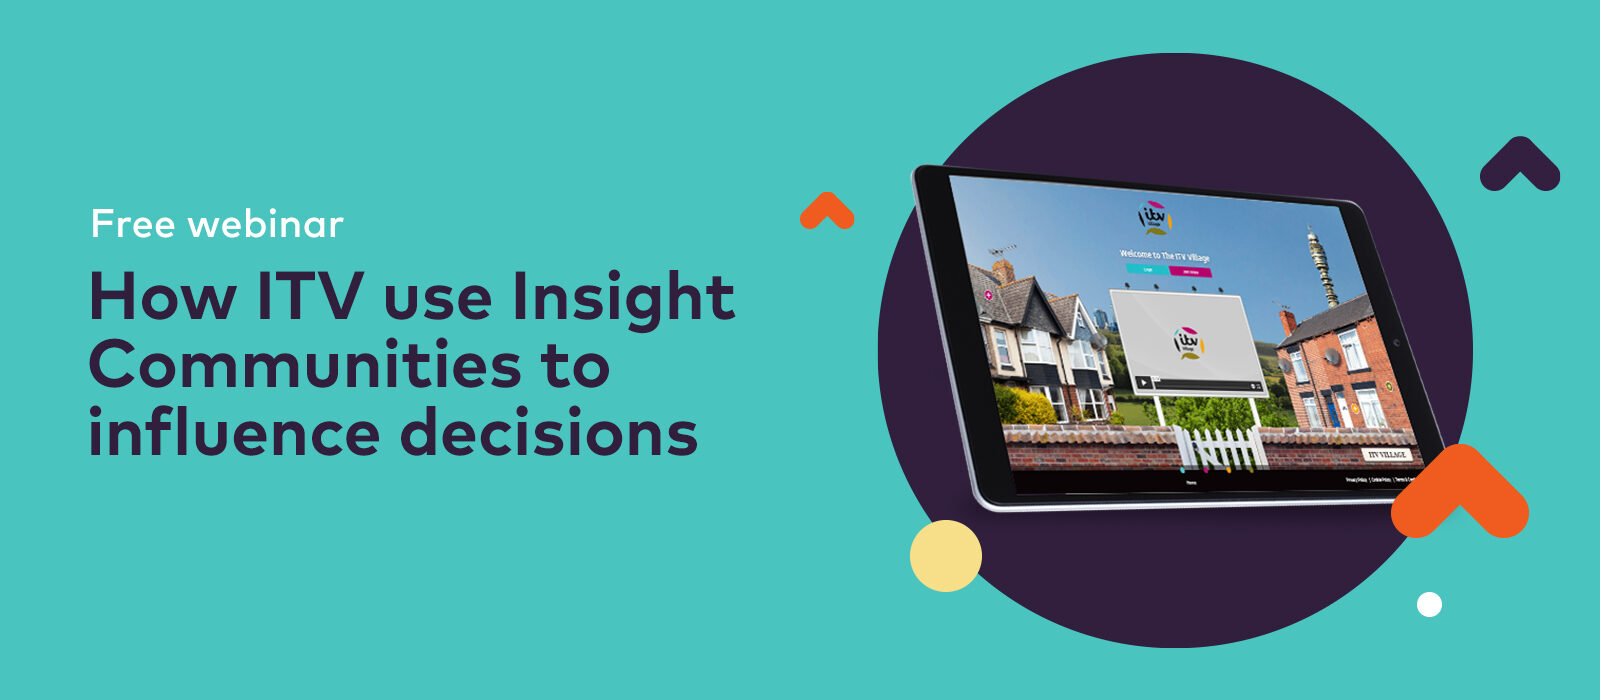 How ITV use Insight Communities to influence decisions